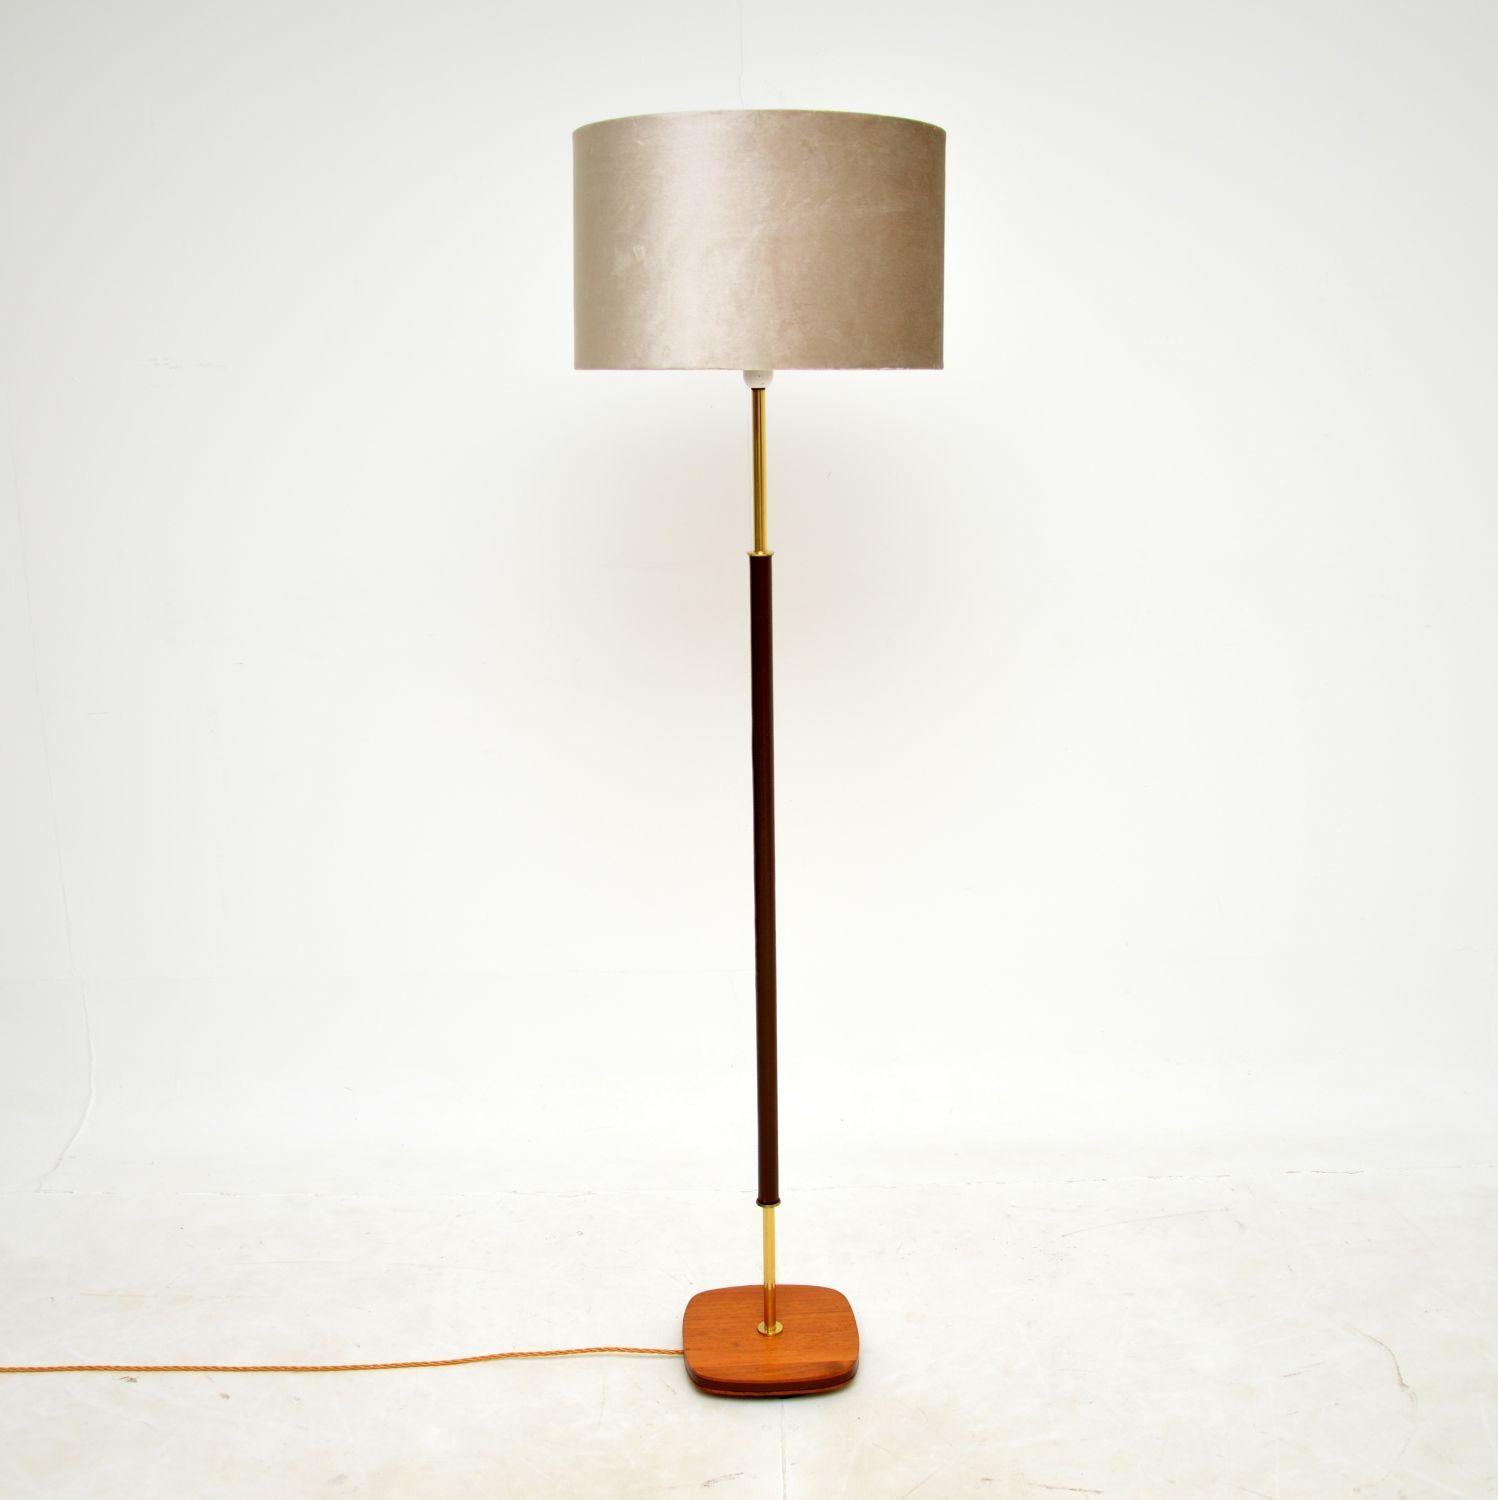 A superb vintage floor lamp in brass, teak and leather. This was recently imported from Sweden, it dates from the 1960s-1970s.

The quality is amazing, this is beautifully made, with most of the lower potion covered in a gorgeous dark brown leather.